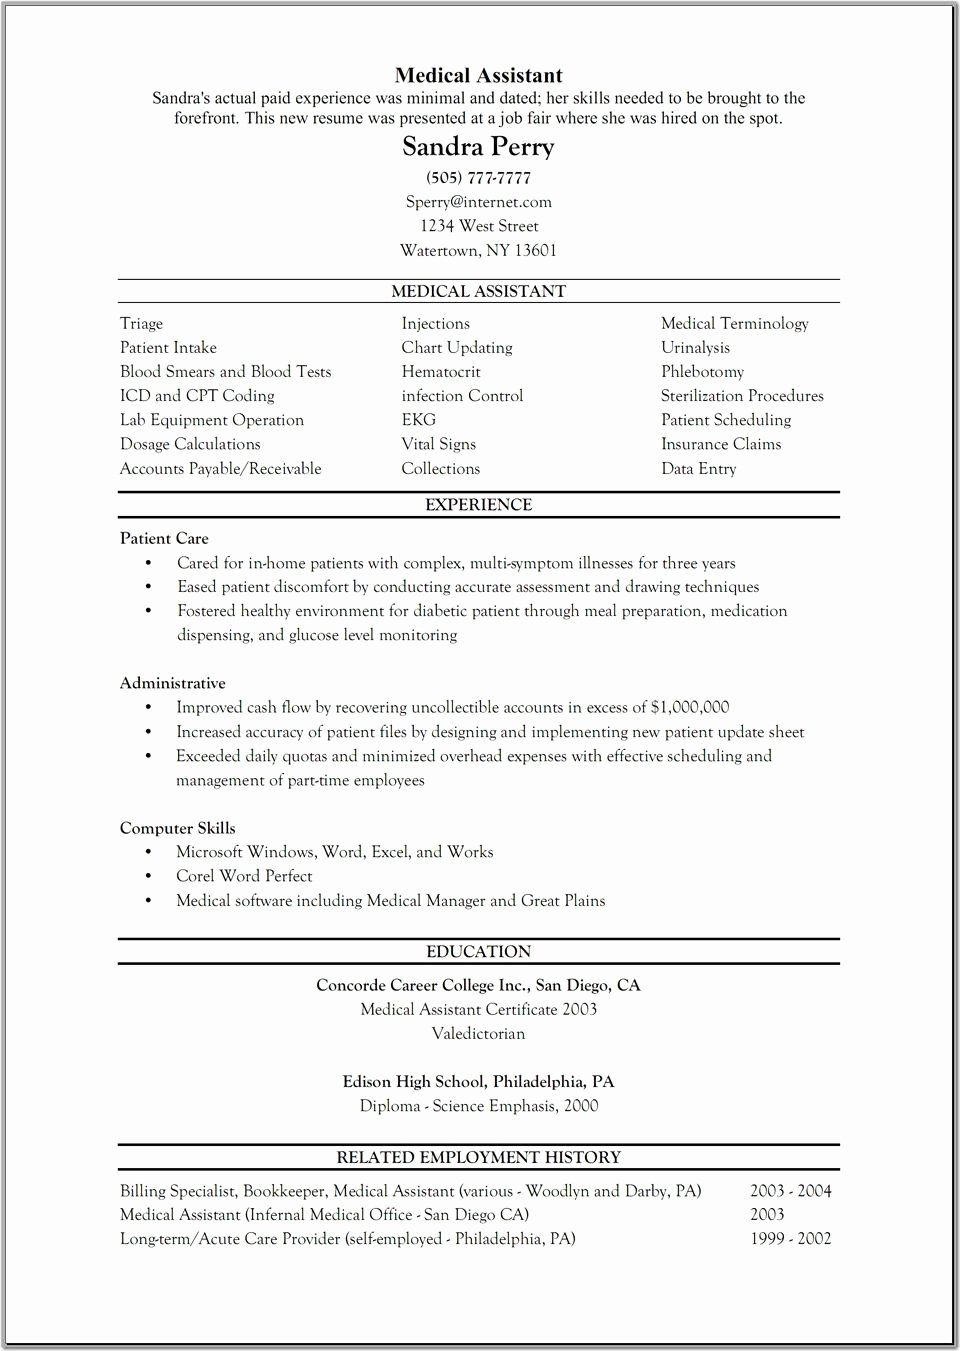 Free Medical assistant Resume Templates Inspirational 2016 Sample Chronological Resumes Medical assistant